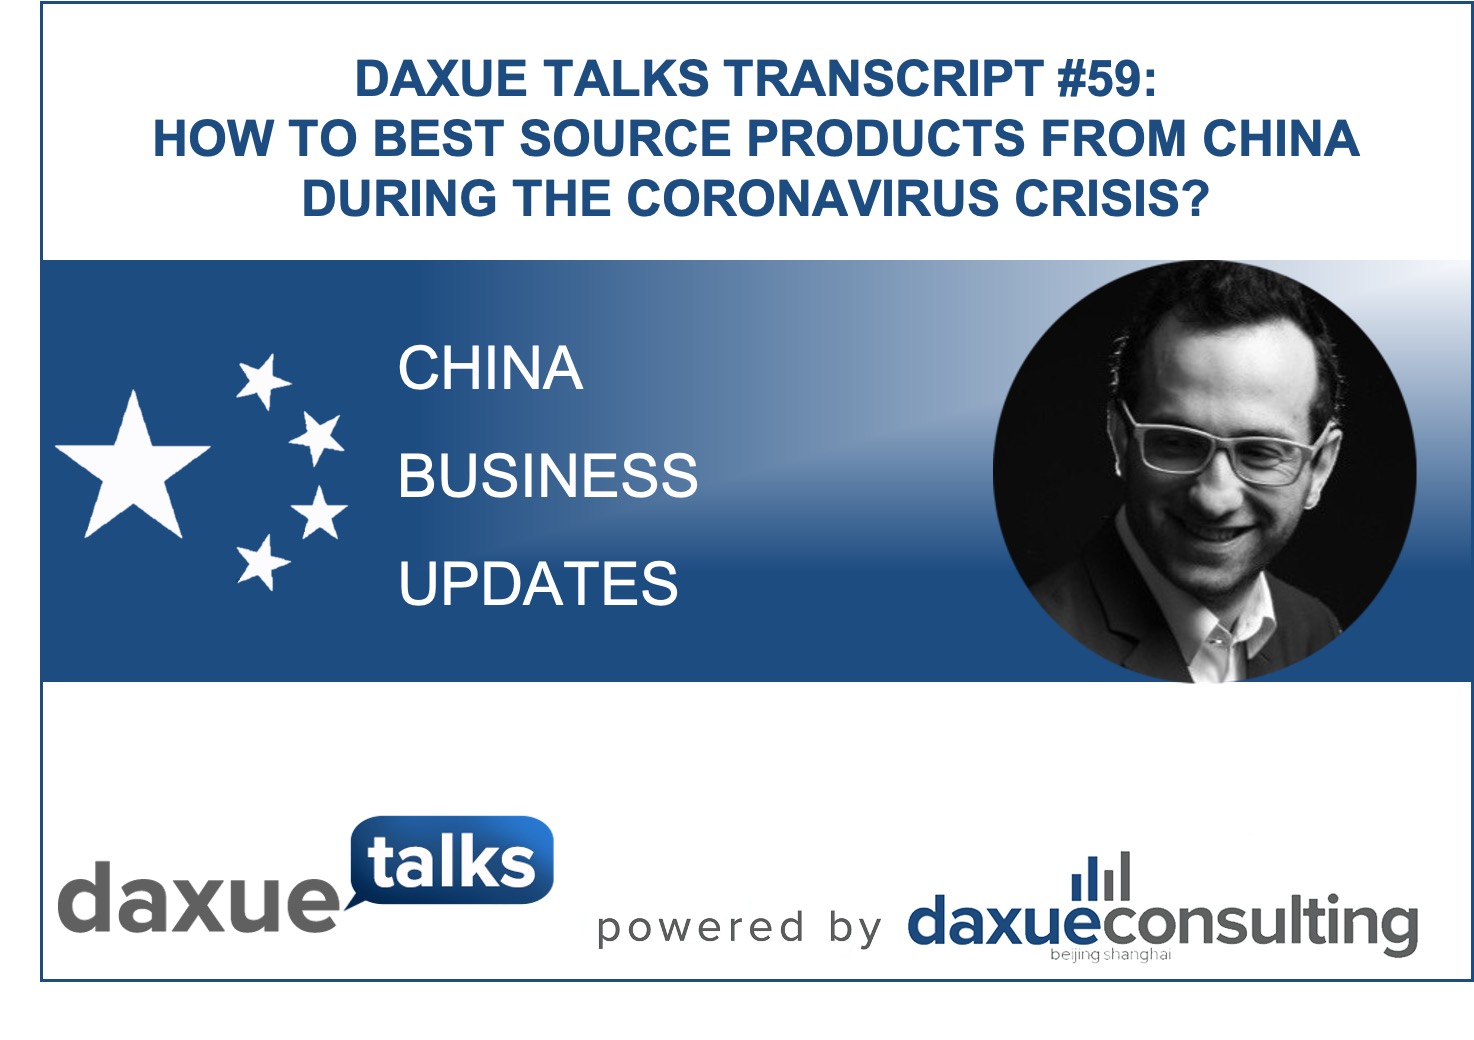 Daxue Talks transcript #59: How to best source products from China during the coronavirus crisis?